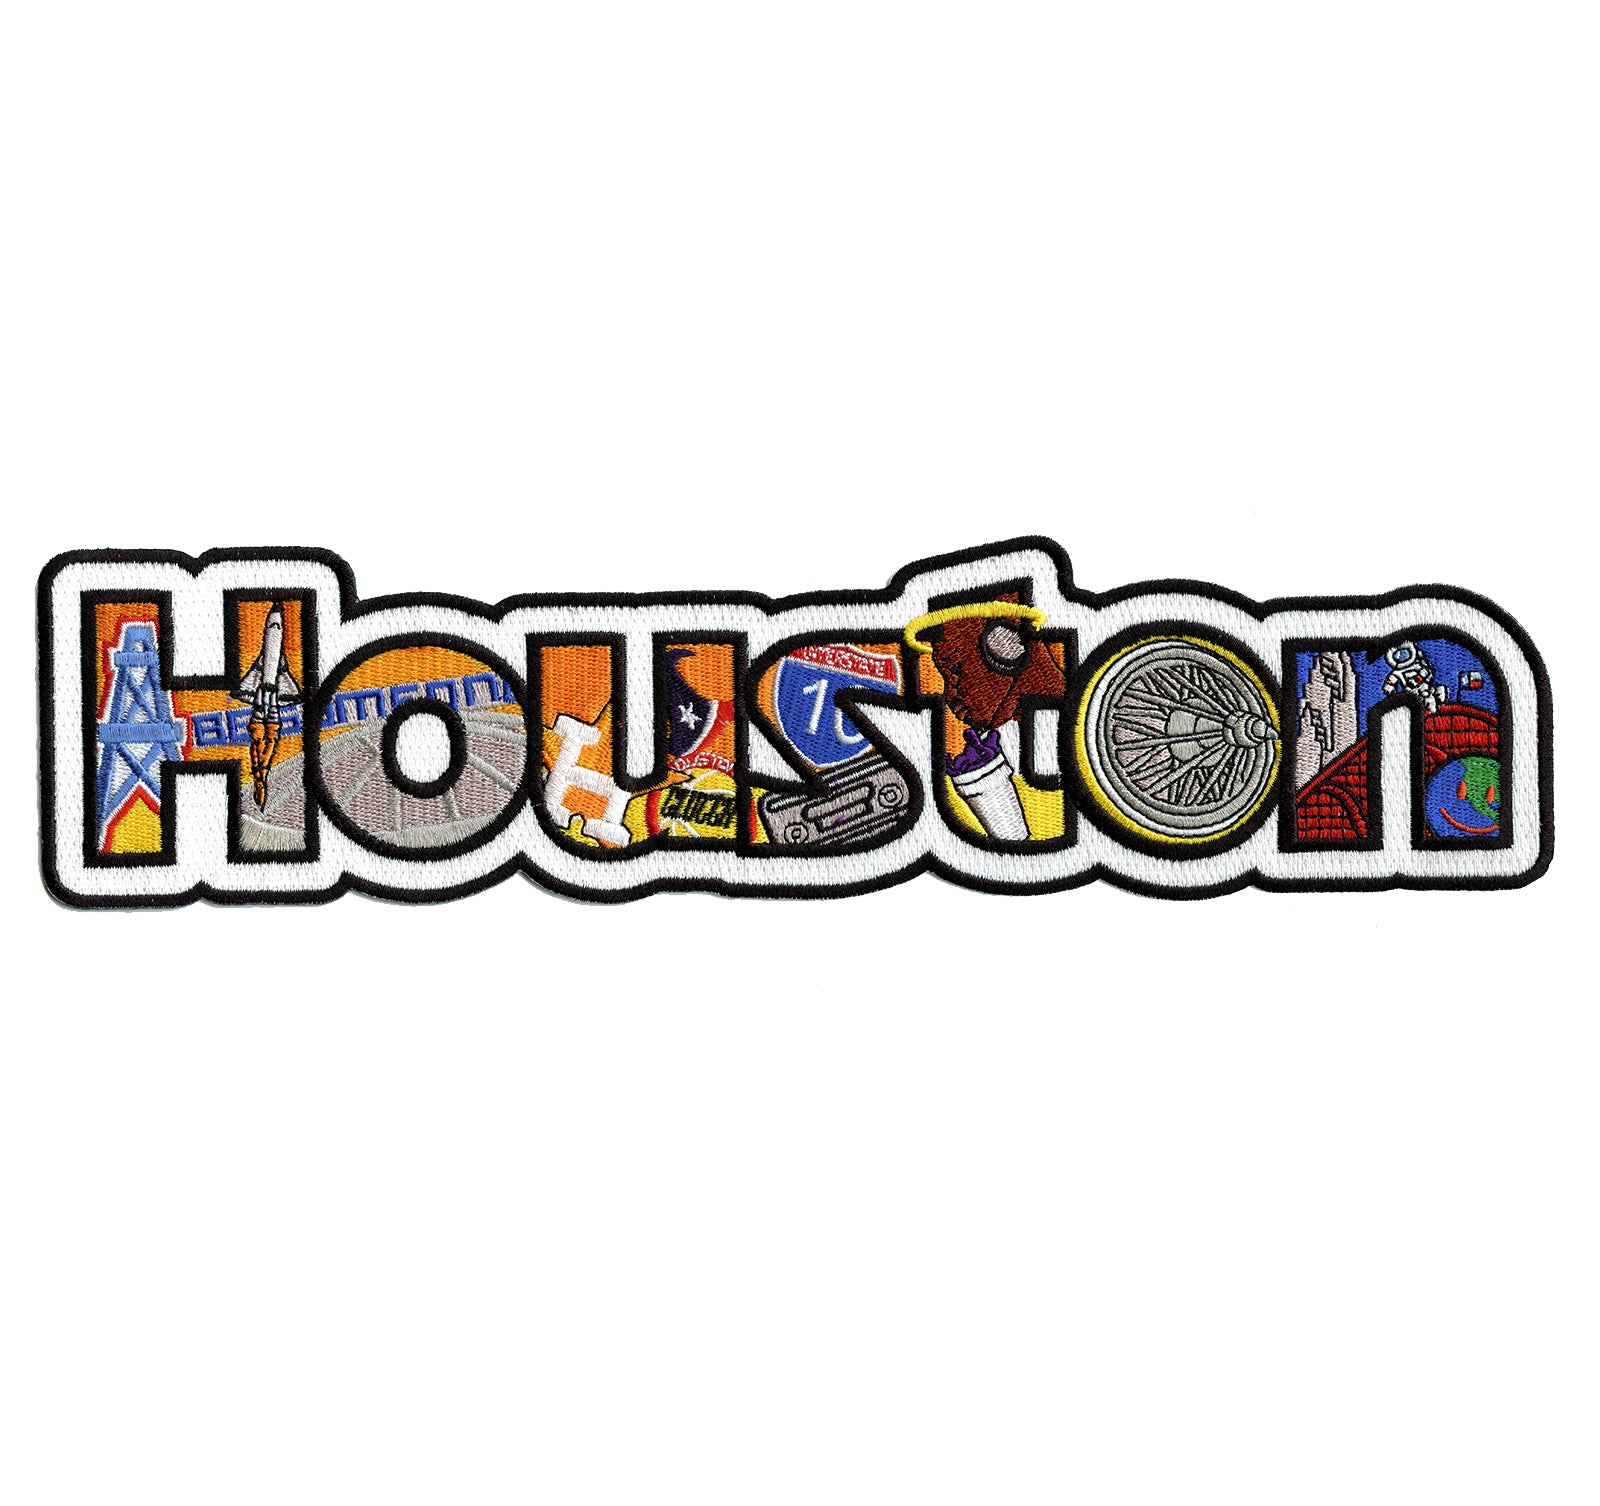 Houston Rockets discount, GetQuotenow Patch Collection